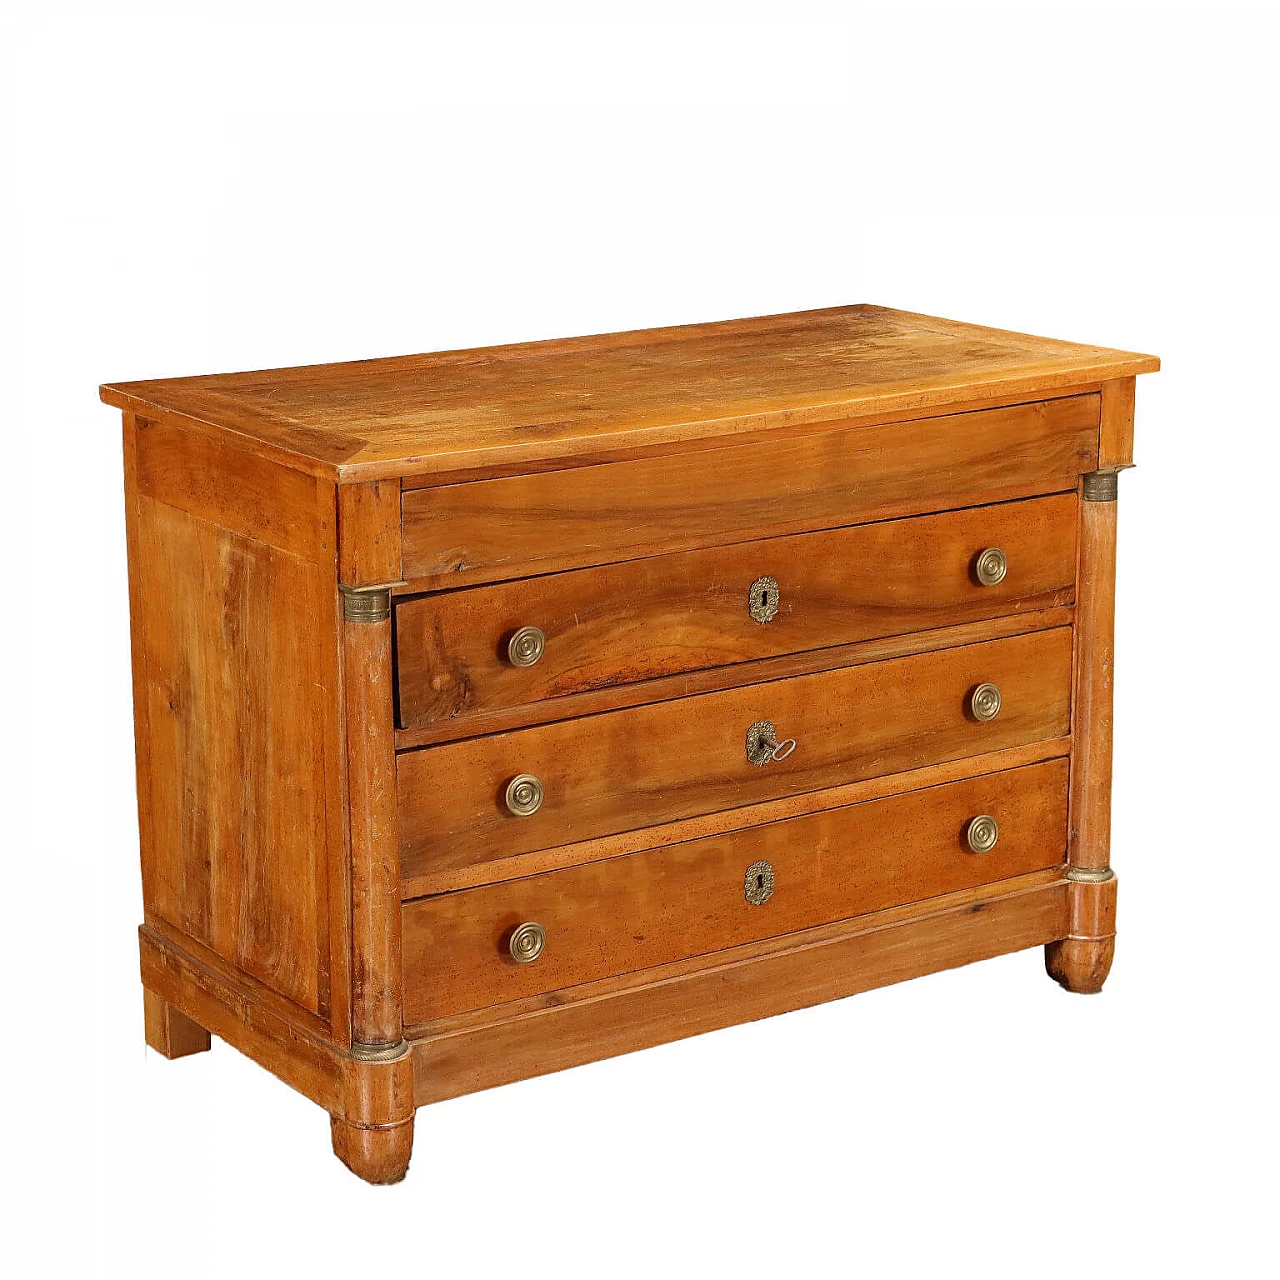 Empire chest of drawers in walnut, fir, poplar, early 19th century 1